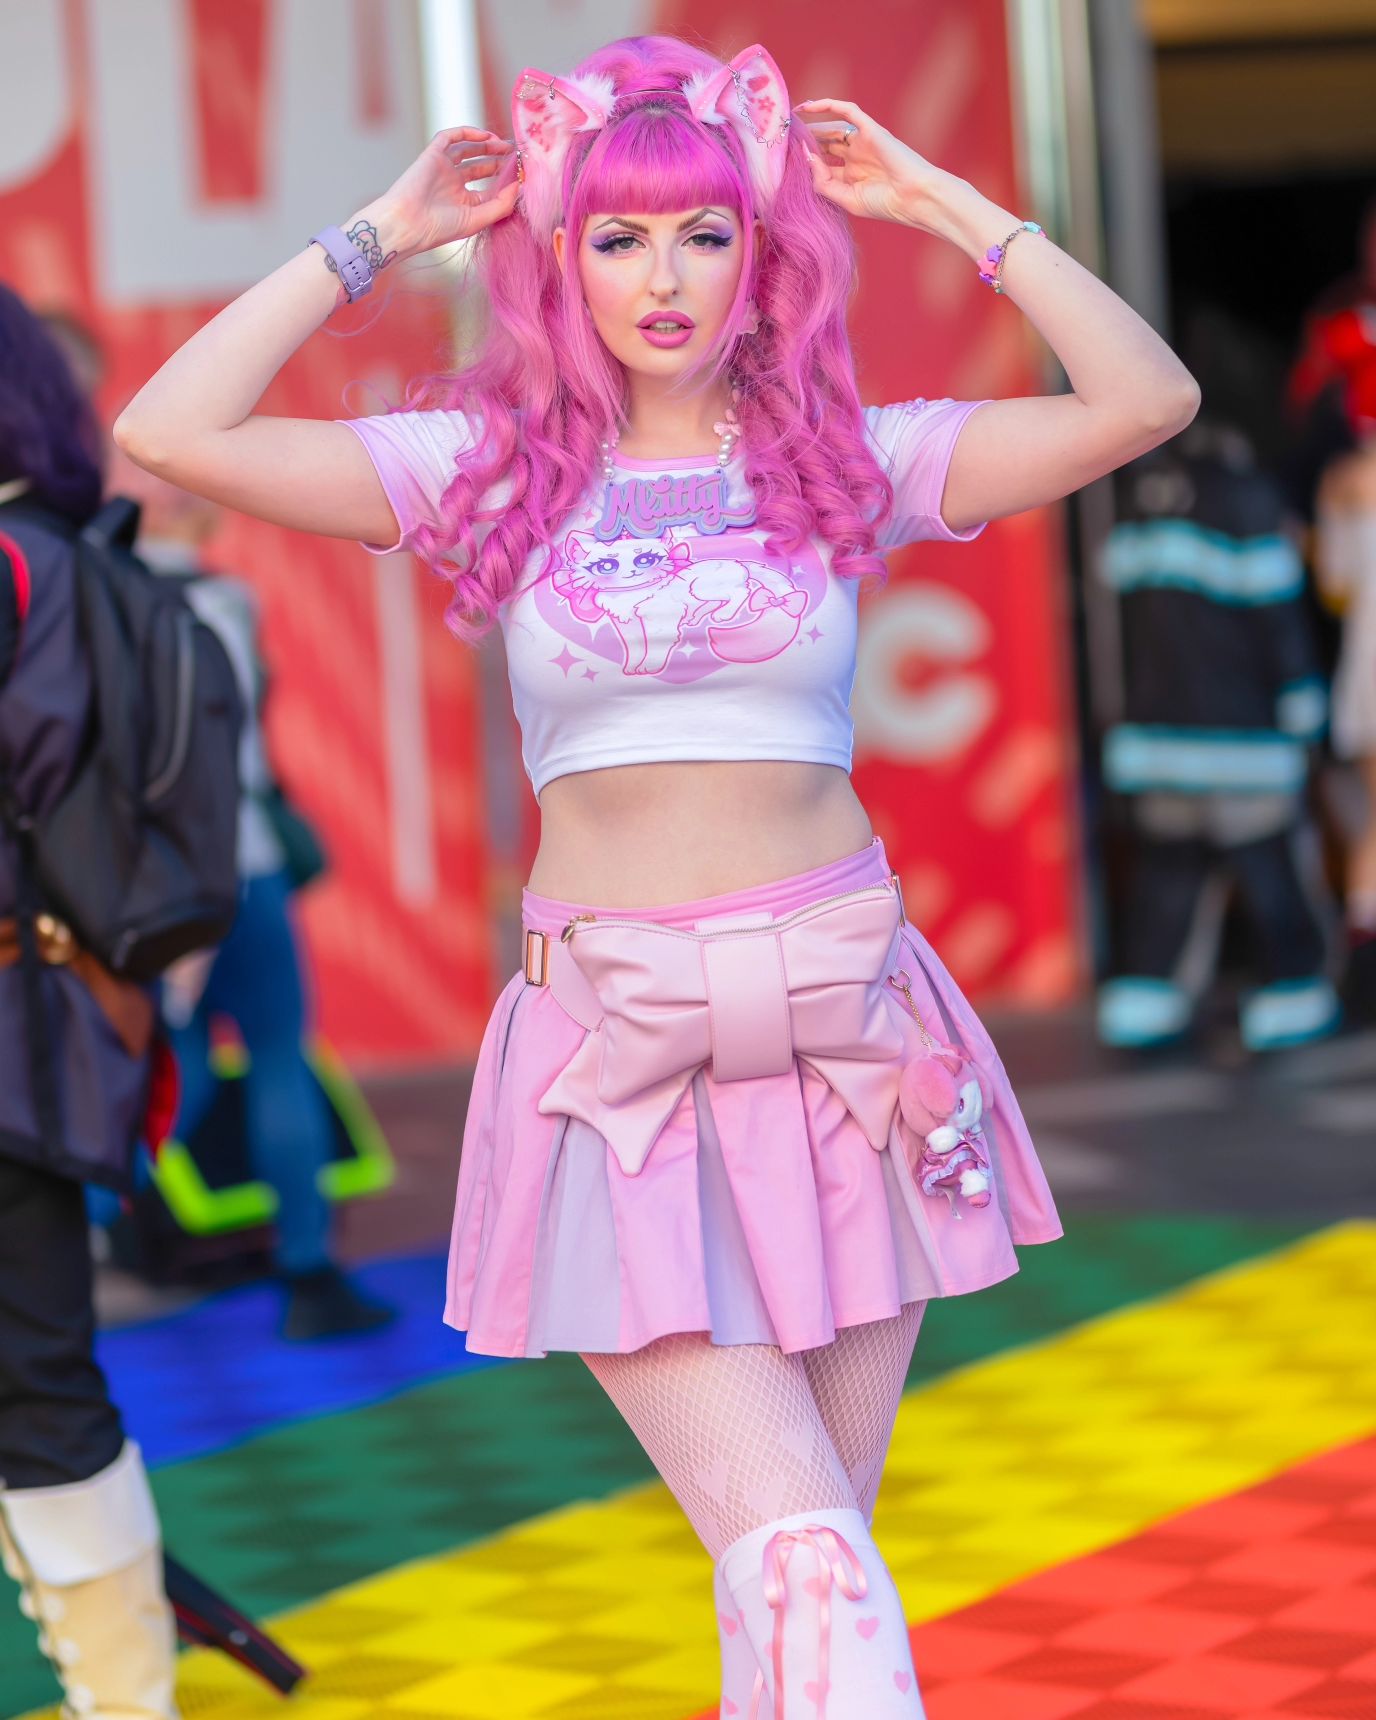 🩷🌸Mkitty has arrived!🌸🩷

Photography by @anuthomas 📸 

This is the look I wore on Saturday at @dreamhackau 
When I found out I got accepted as a creator I immediately started planning my looks for the weekend. I wanted to live my full kitty fantasy. 
There's some people I want to thank for making this look happen! 
Thank you to @rosenyanvt for taking the time for creating my new Mkitty cat artwork so I could make it front and centre on my shirt! I couldn't be happier with how it looks!!!
Thank you to Kat from @fracturedlace for 3D printing my Mkitty logo (made by @warmelon ) so I could turn it into the cutest necklace ever!
Thank you to @kittykitsune_ for whipping up my custom kitty ears right after she moved and had to set her studio up again. This pair of ears are my first ever pair so they will be forever treasured!
Thank you to my amazing hair dresser @killerlooks_by_amanda for always looking after my hair and making it the best pink fantasy you want to eat! And for making time to dye @christianpaulcreative hair pink too!
Thank you to @kawaiiaestheticsshop for sending me the most beautiful hand made kitty paw earrings! I wore them all weekend and better photos will come soon!

There are definitely more people I want to thank in my next post♥︎

#mkitty #Twitch #streamer #gamergirl #egirl #pinkhair #shopmyviolet #sugarthrillz #dollskill #blackmilkclothing #arcticfox #alternative